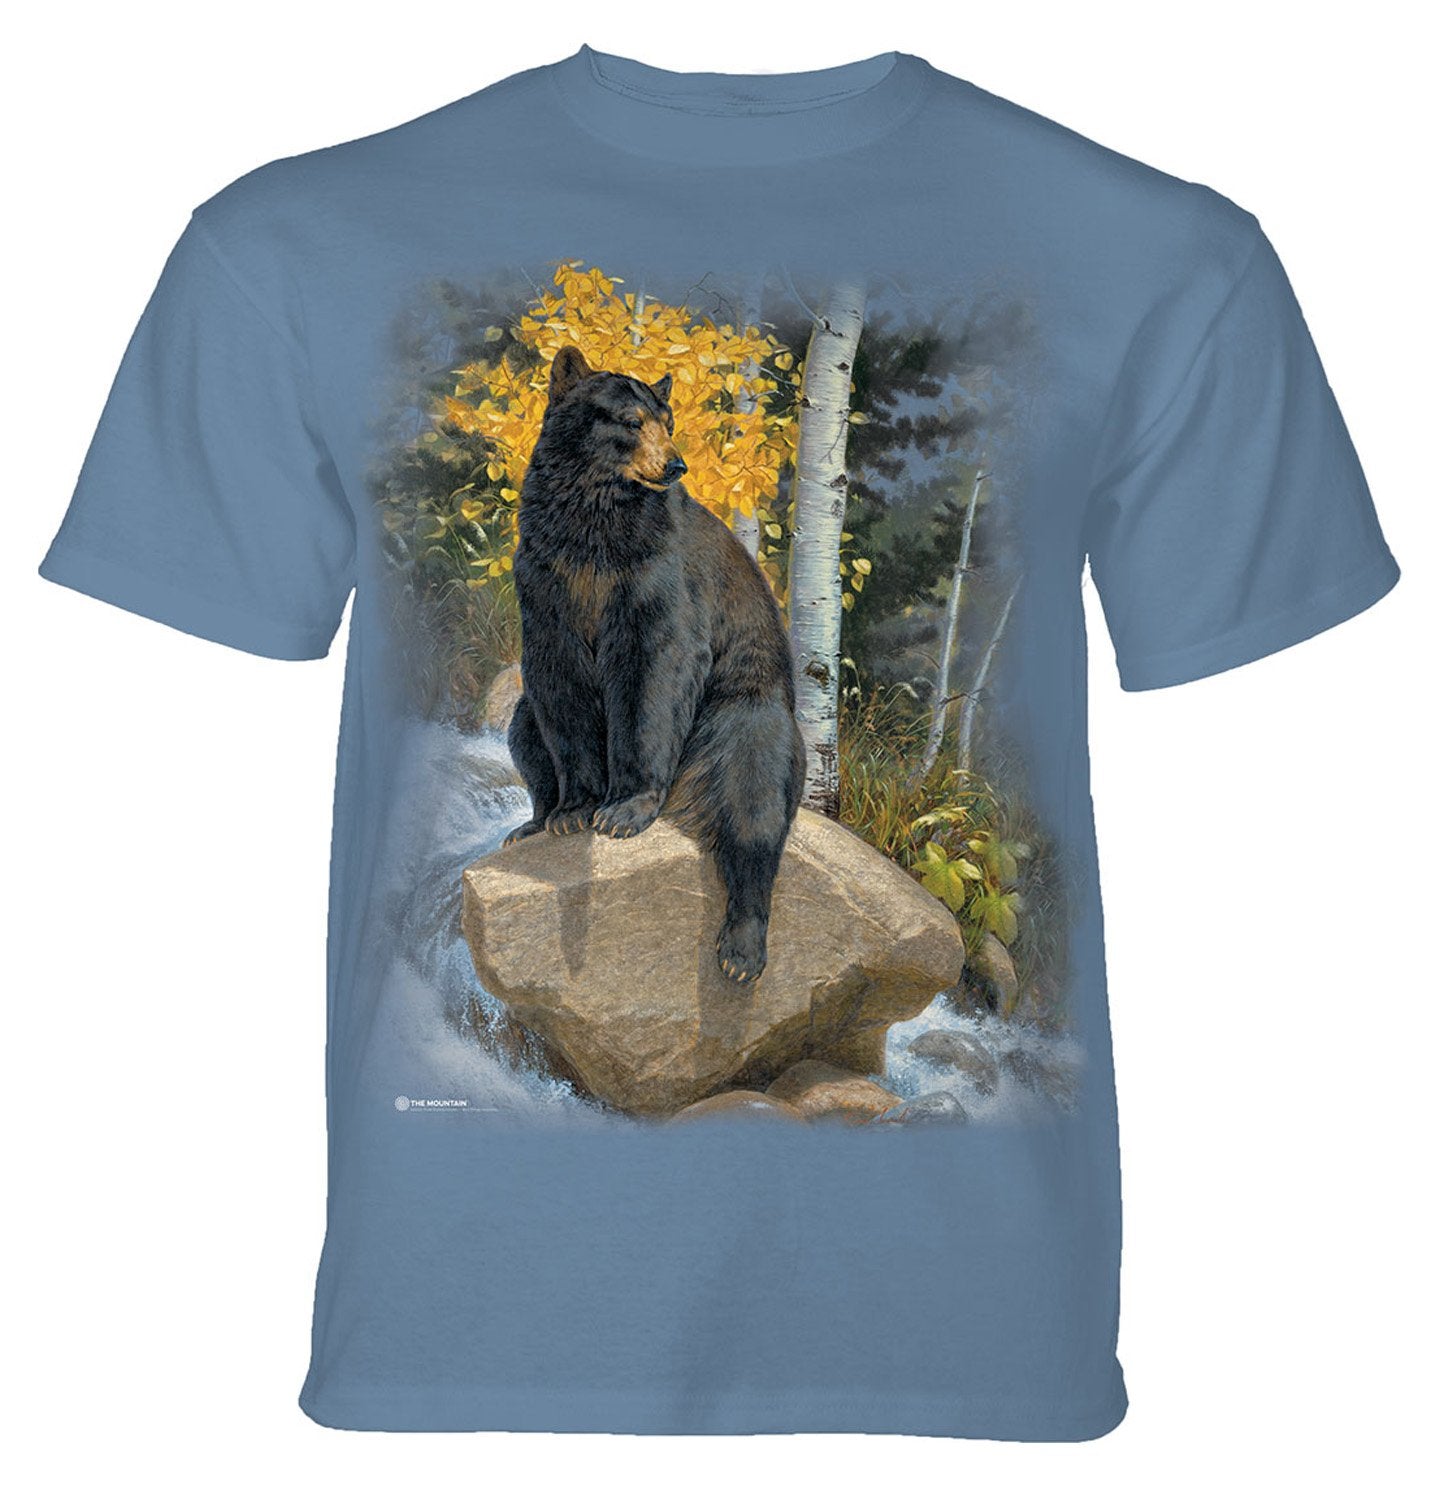 The Mountain - Paws That Refreshes - Adult Unisex T-Shirt